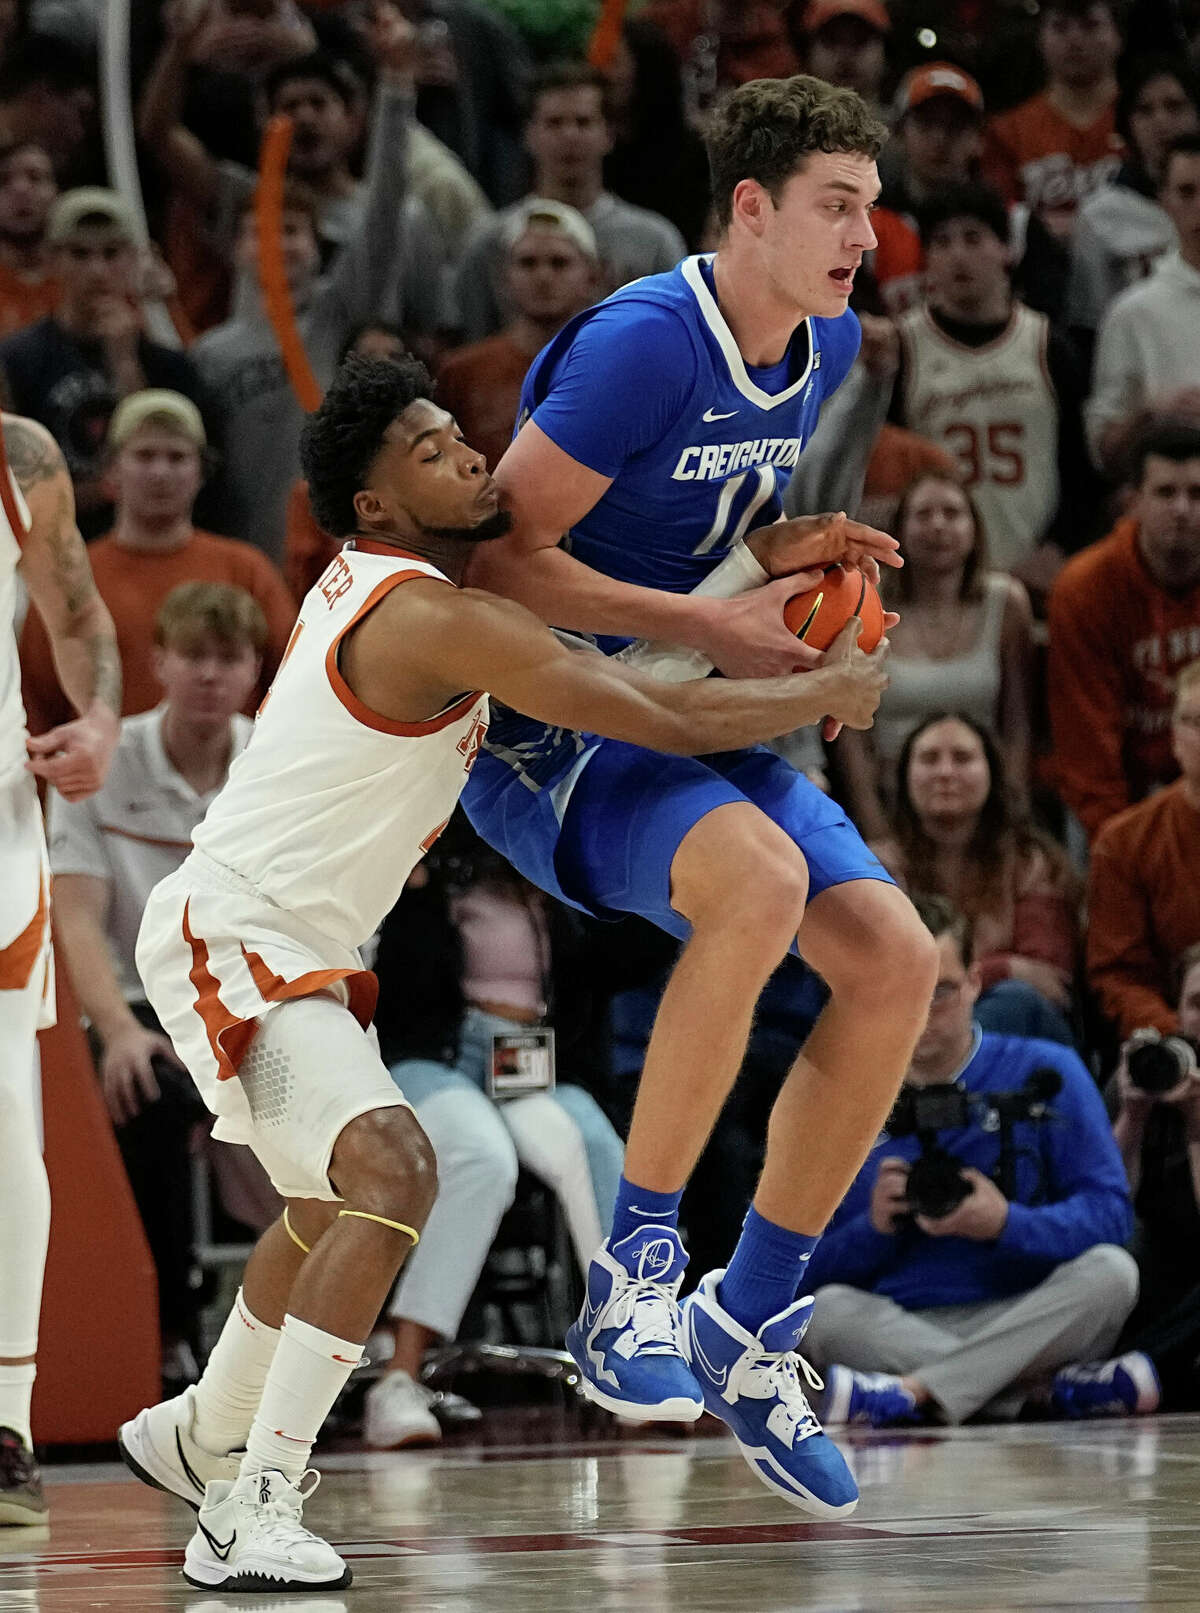 Creighton center Ryan Kalkbrenner (11) tries to keep the ball from Texas guard Tyrese Hunter during the second half of an NCAA college basketball game in Austin, Texas, Thursday, Dec. 1, 2022. (AP Photo/Eric Gay)